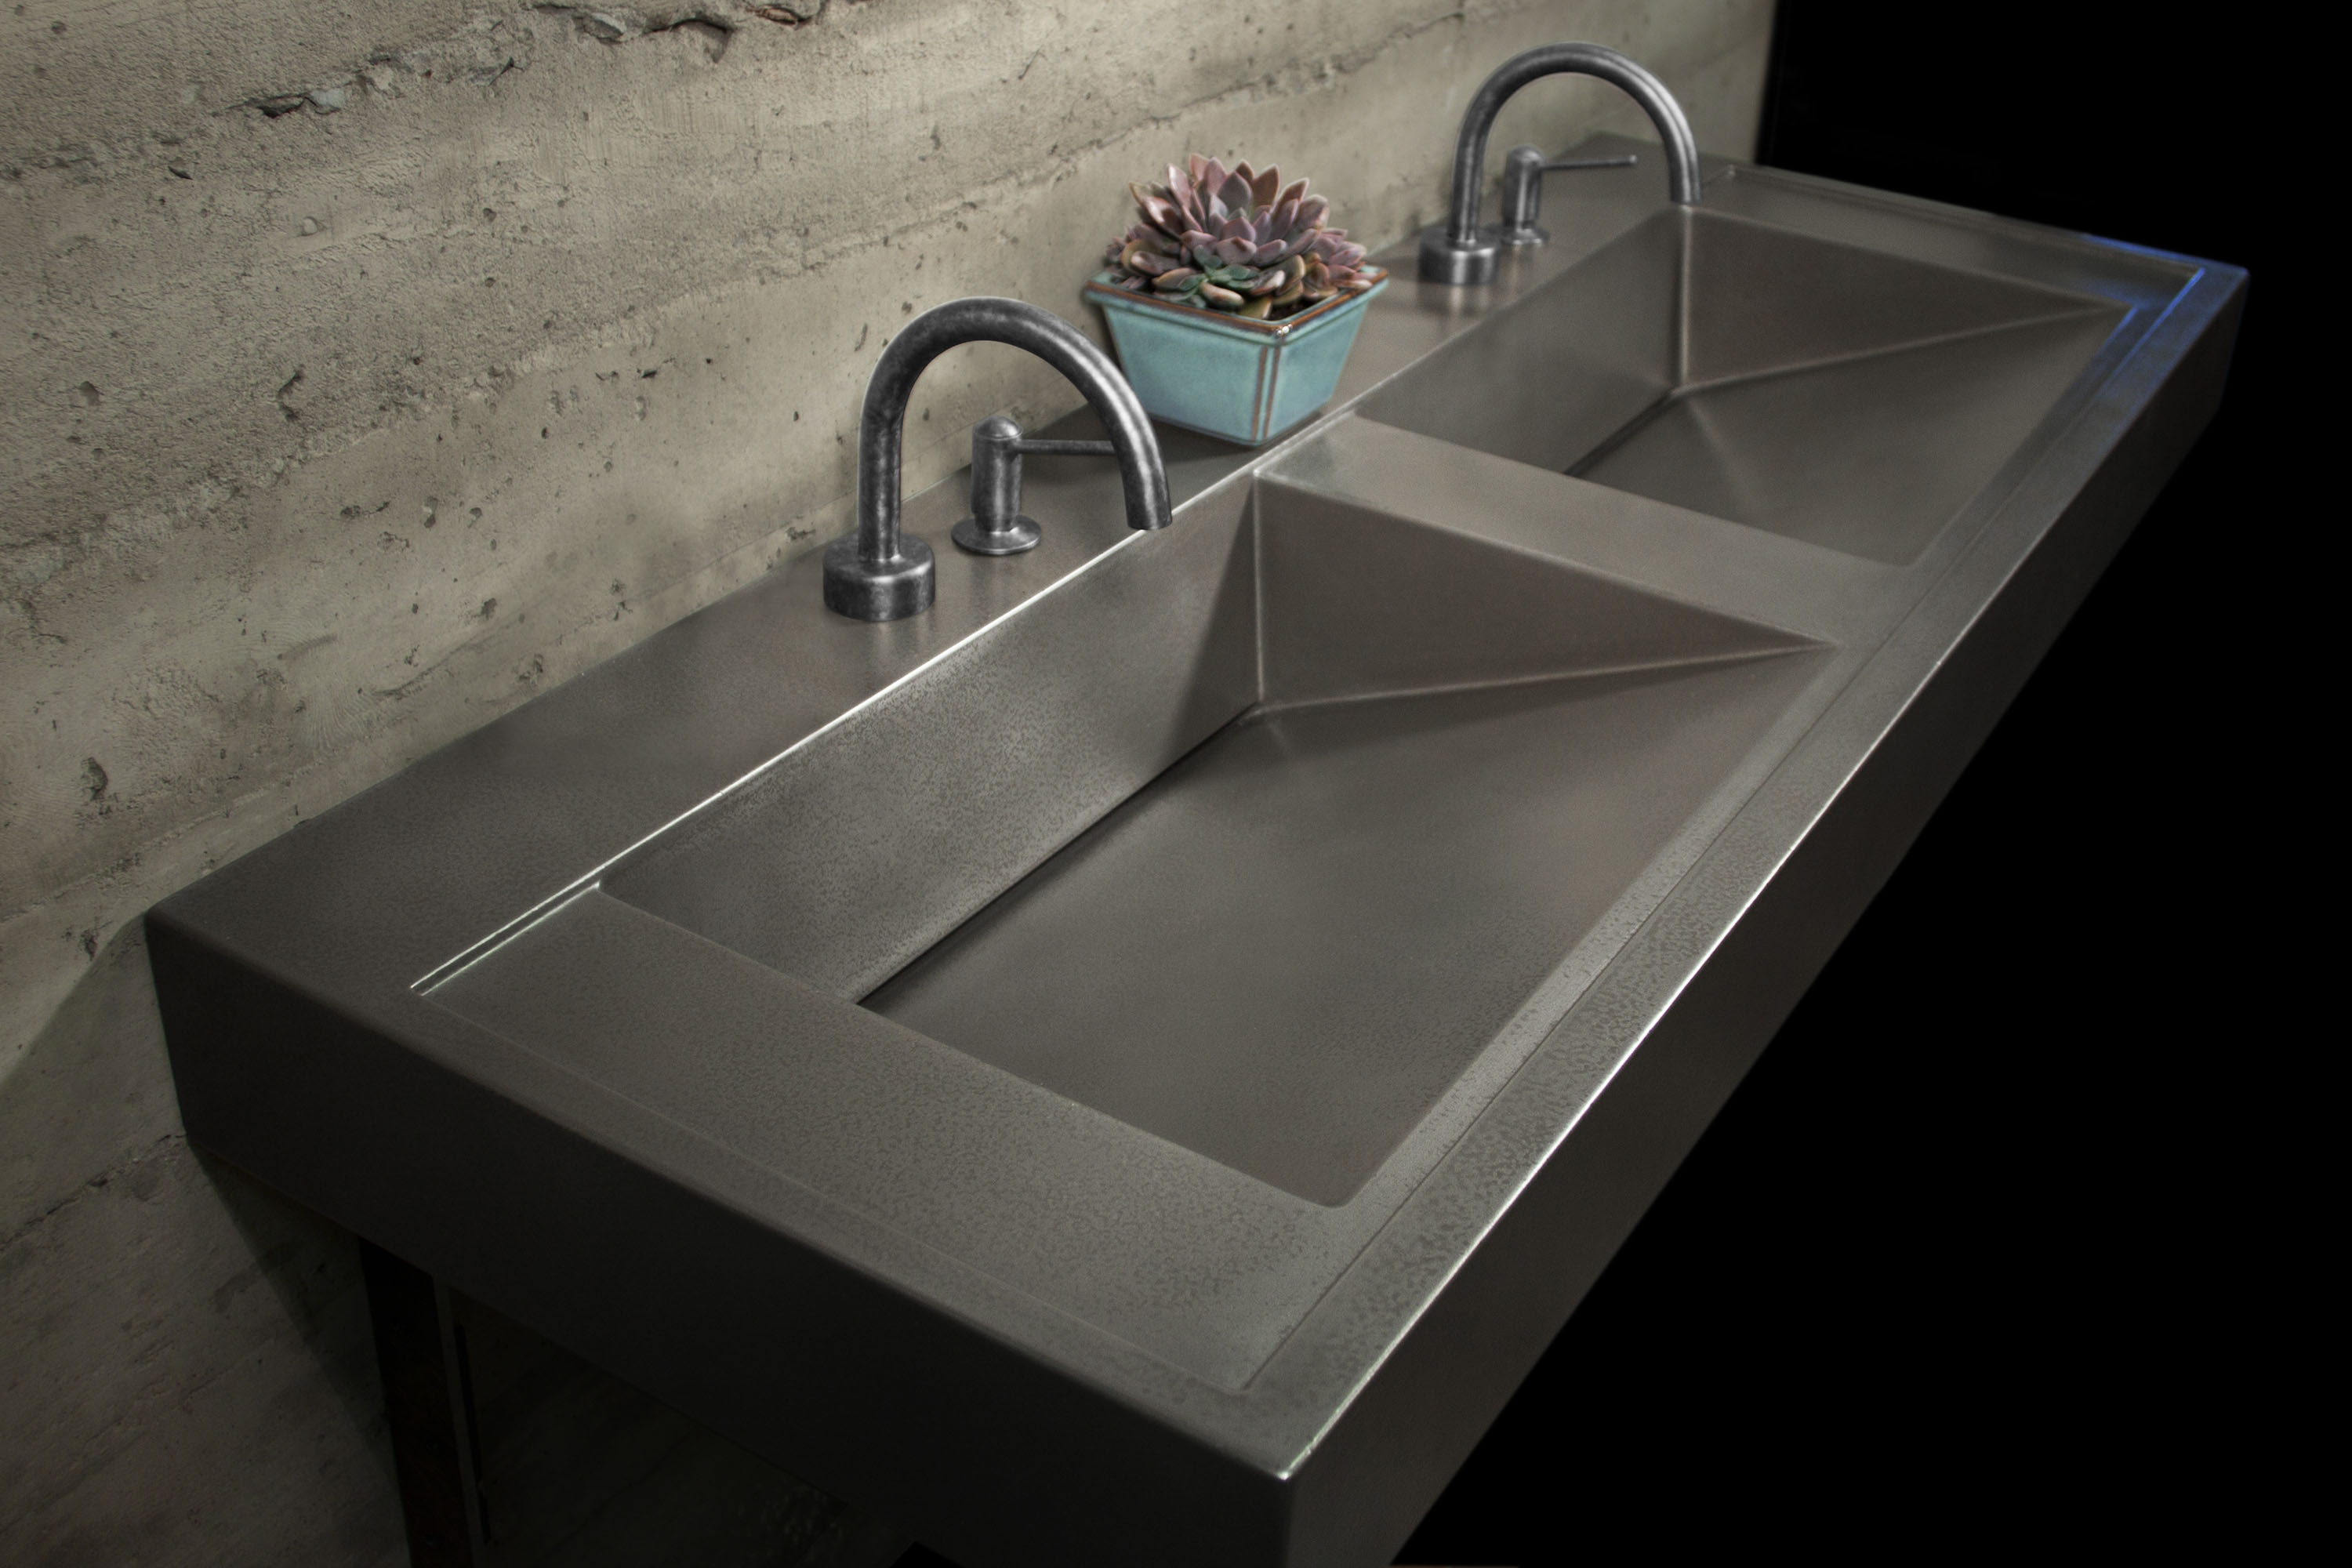 Twin RampSinks in Genuine MetalCrete® Concrete, Pewter Finish, Sans Hands faucets by Sonoma Forge